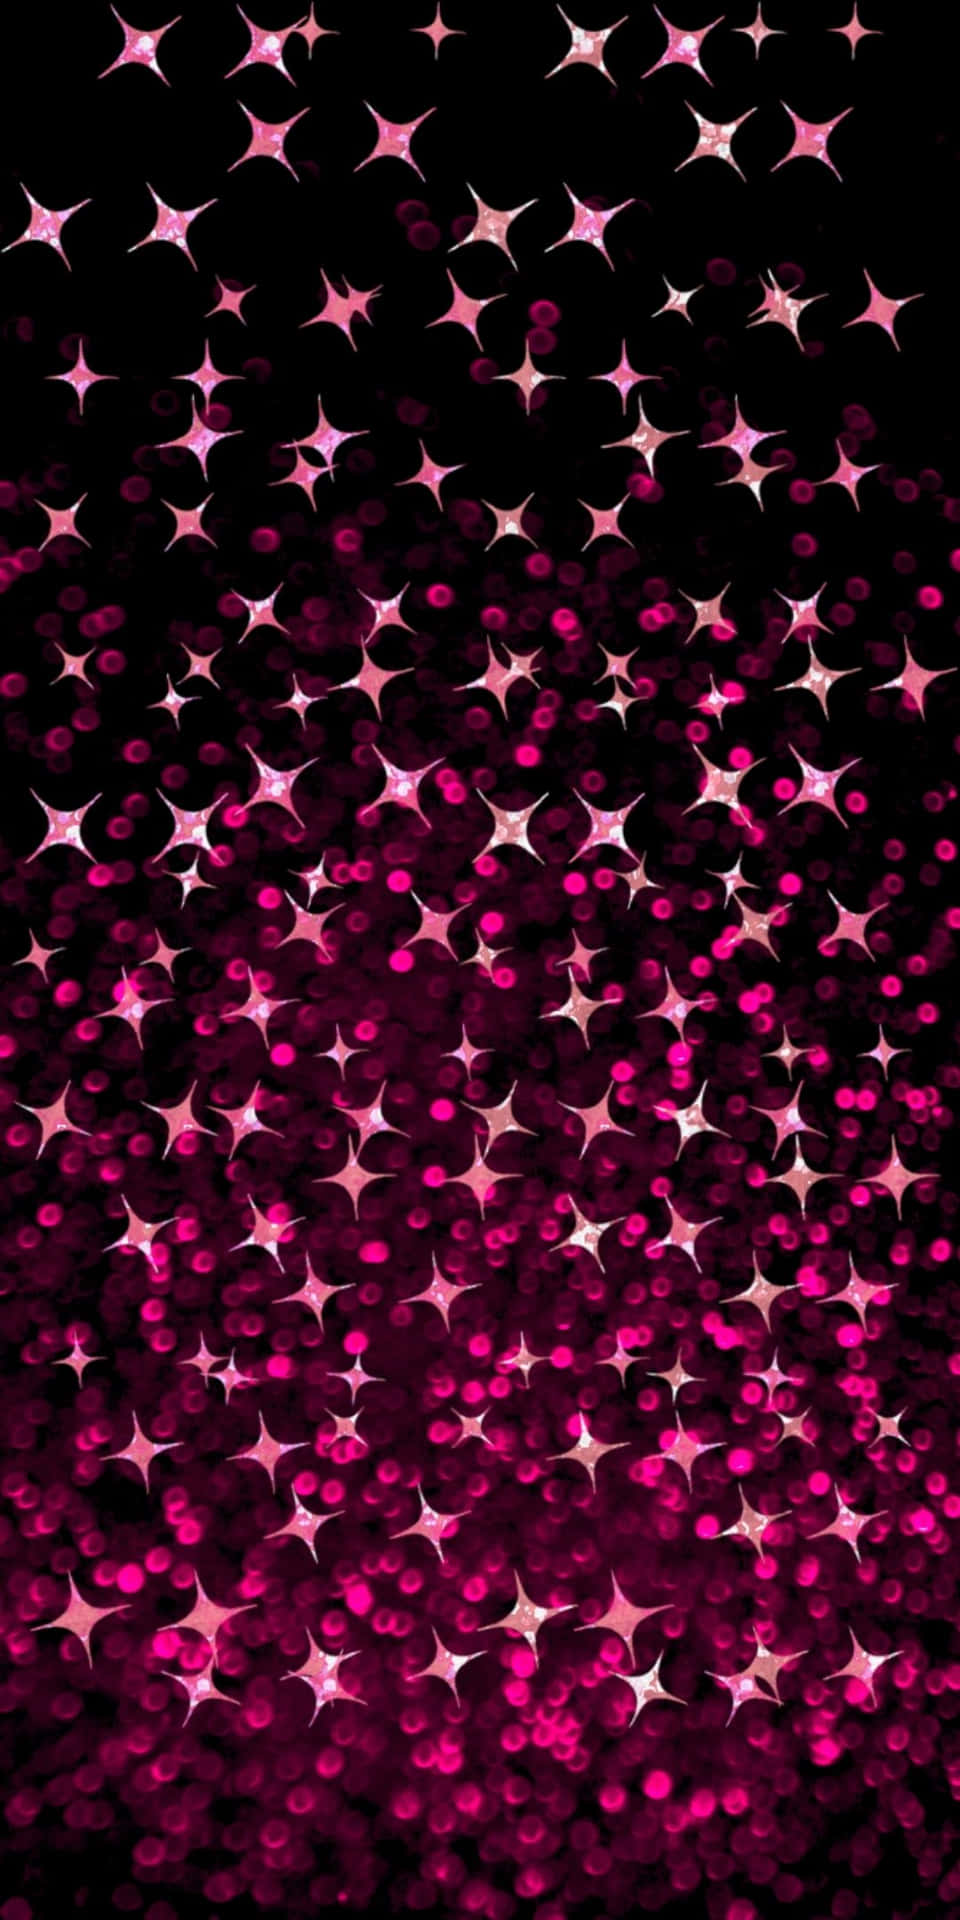 Diamond Shaped Sparkly Pink Background